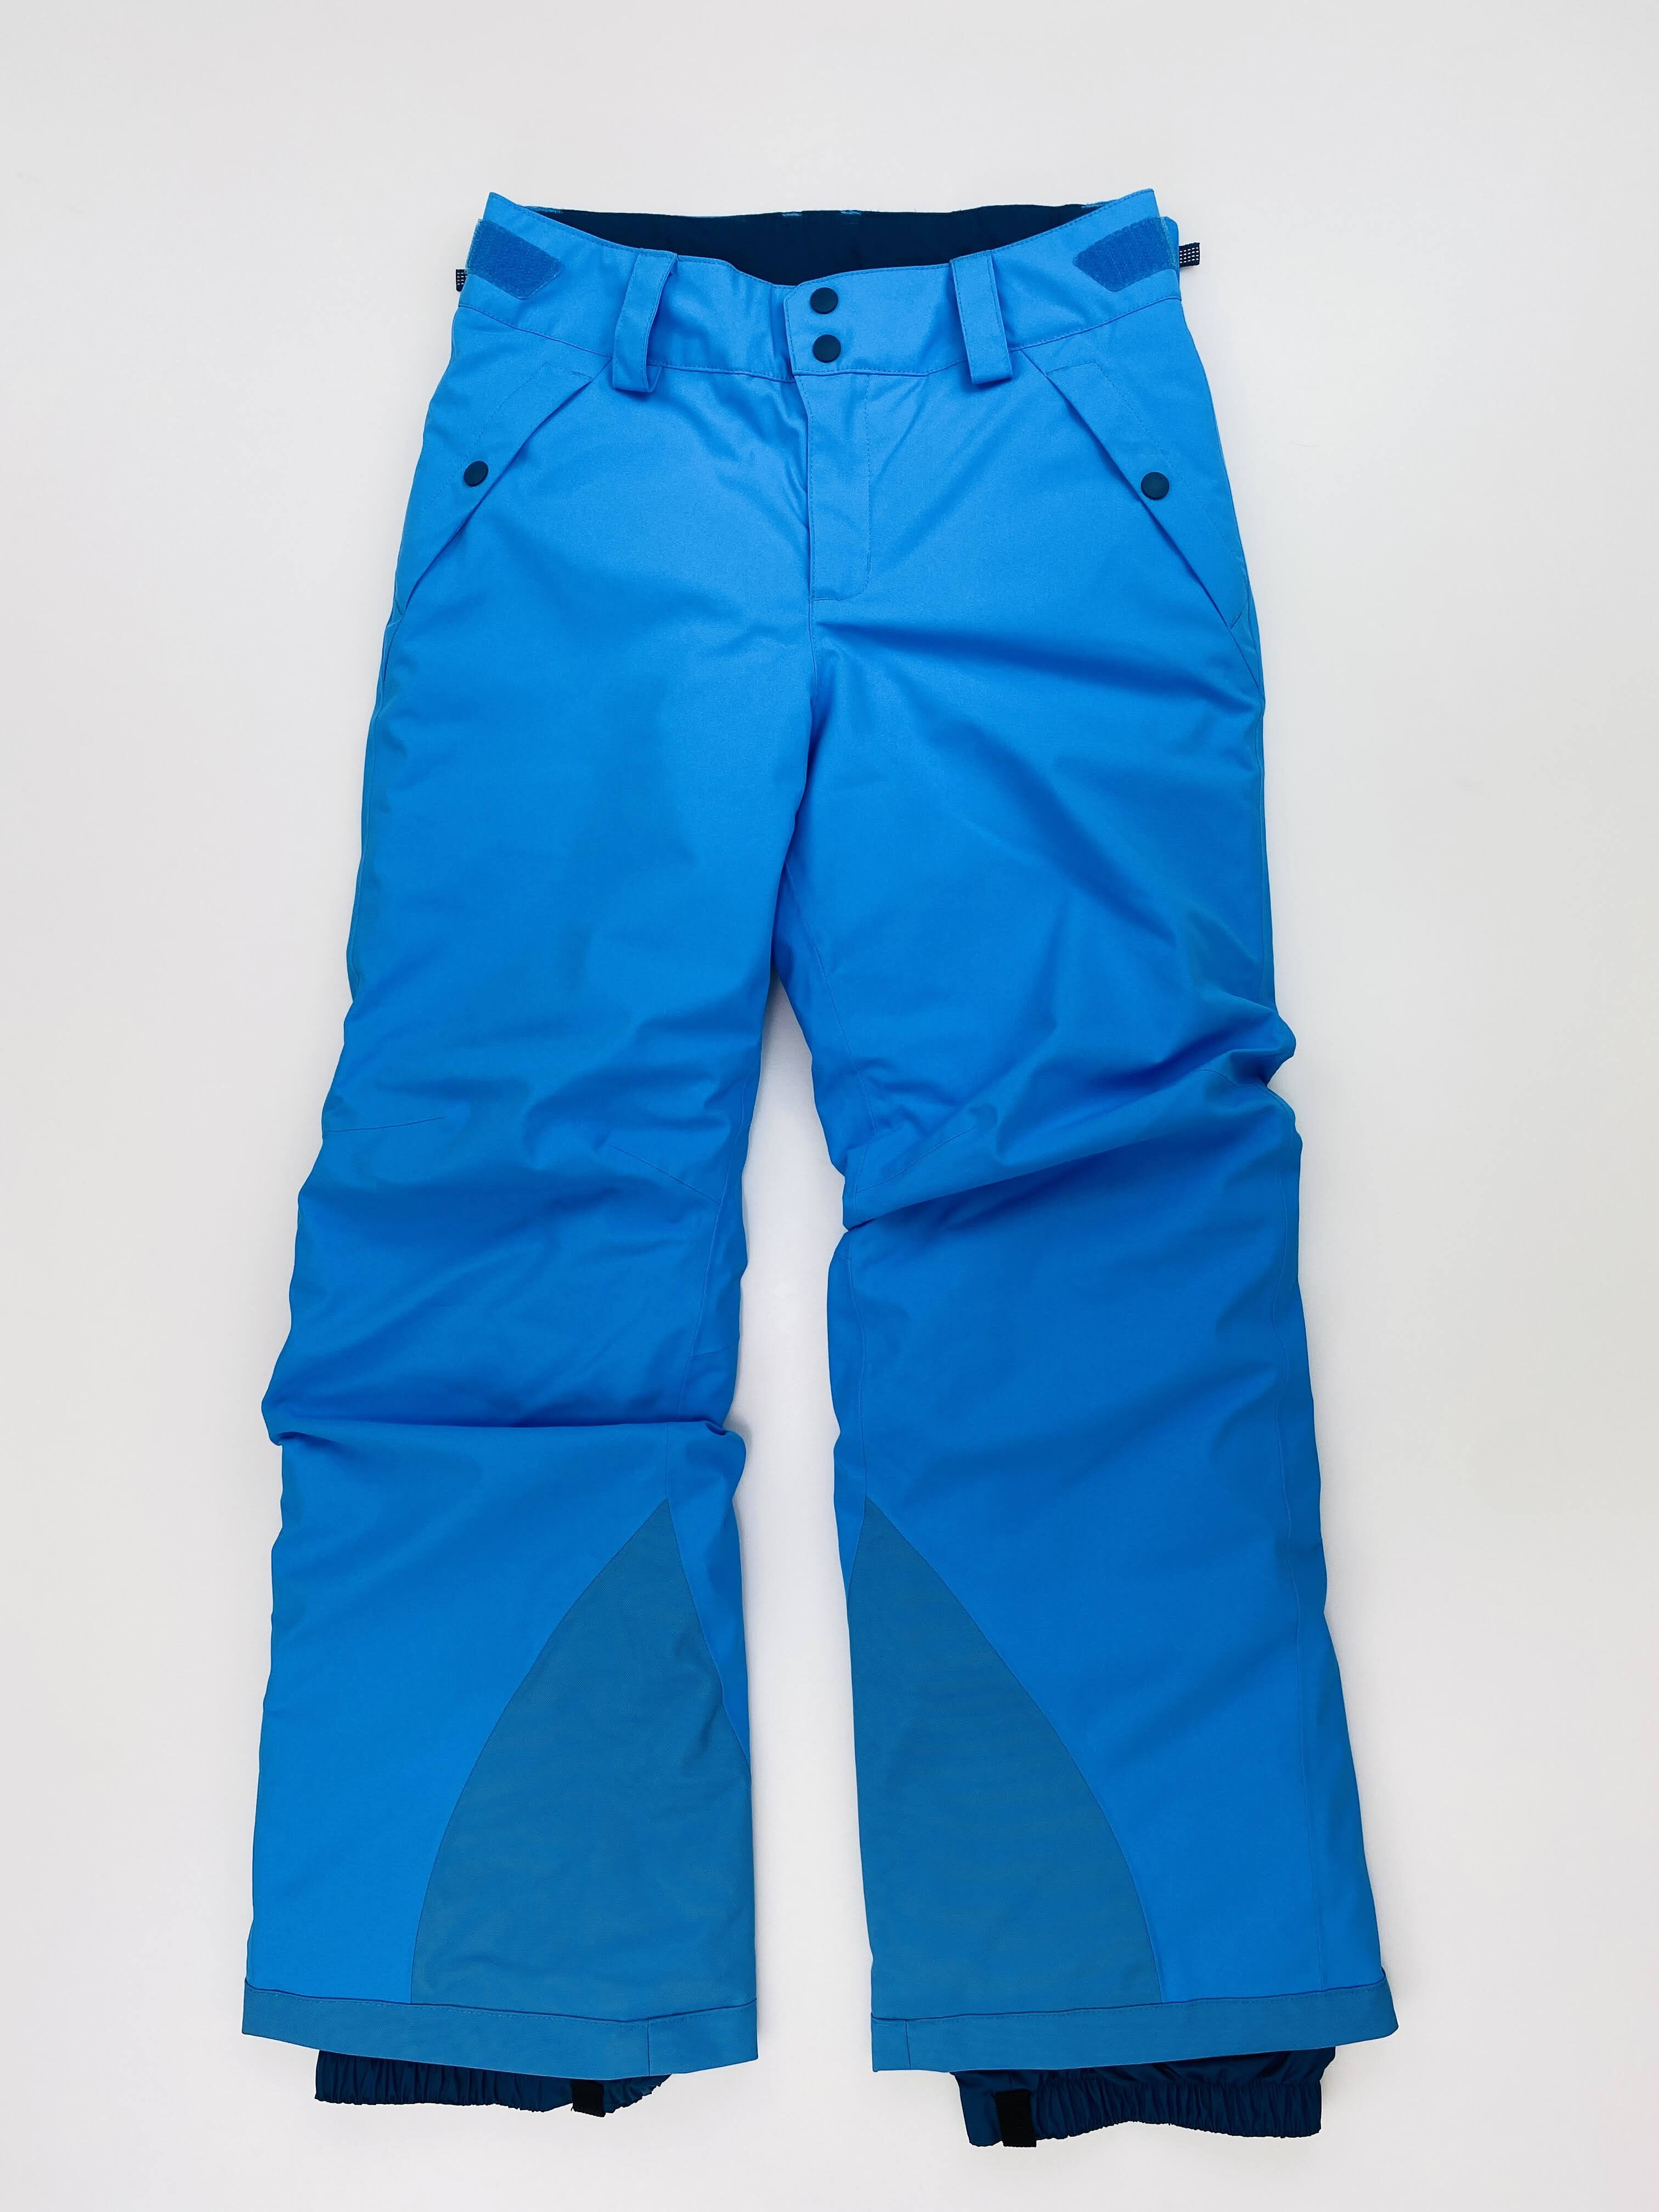 Patagonia Girls' Everyday Ready Pants - Second Hand Ski trousers - Kid's - Blue - M | Hardloop